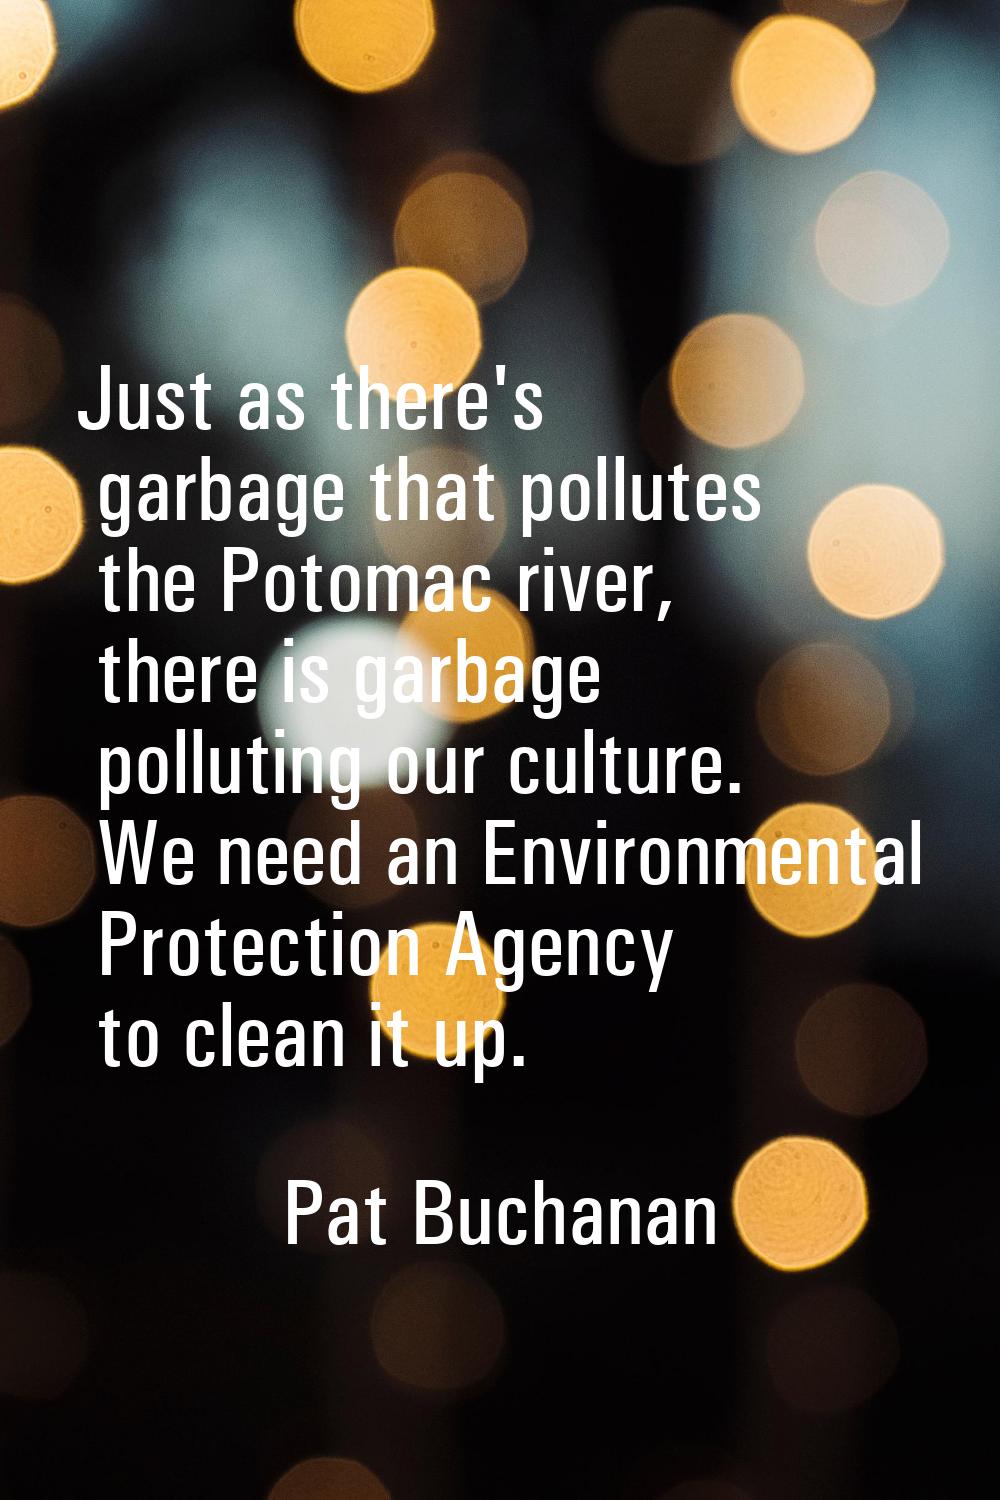 Just as there's garbage that pollutes the Potomac river, there is garbage polluting our culture. We